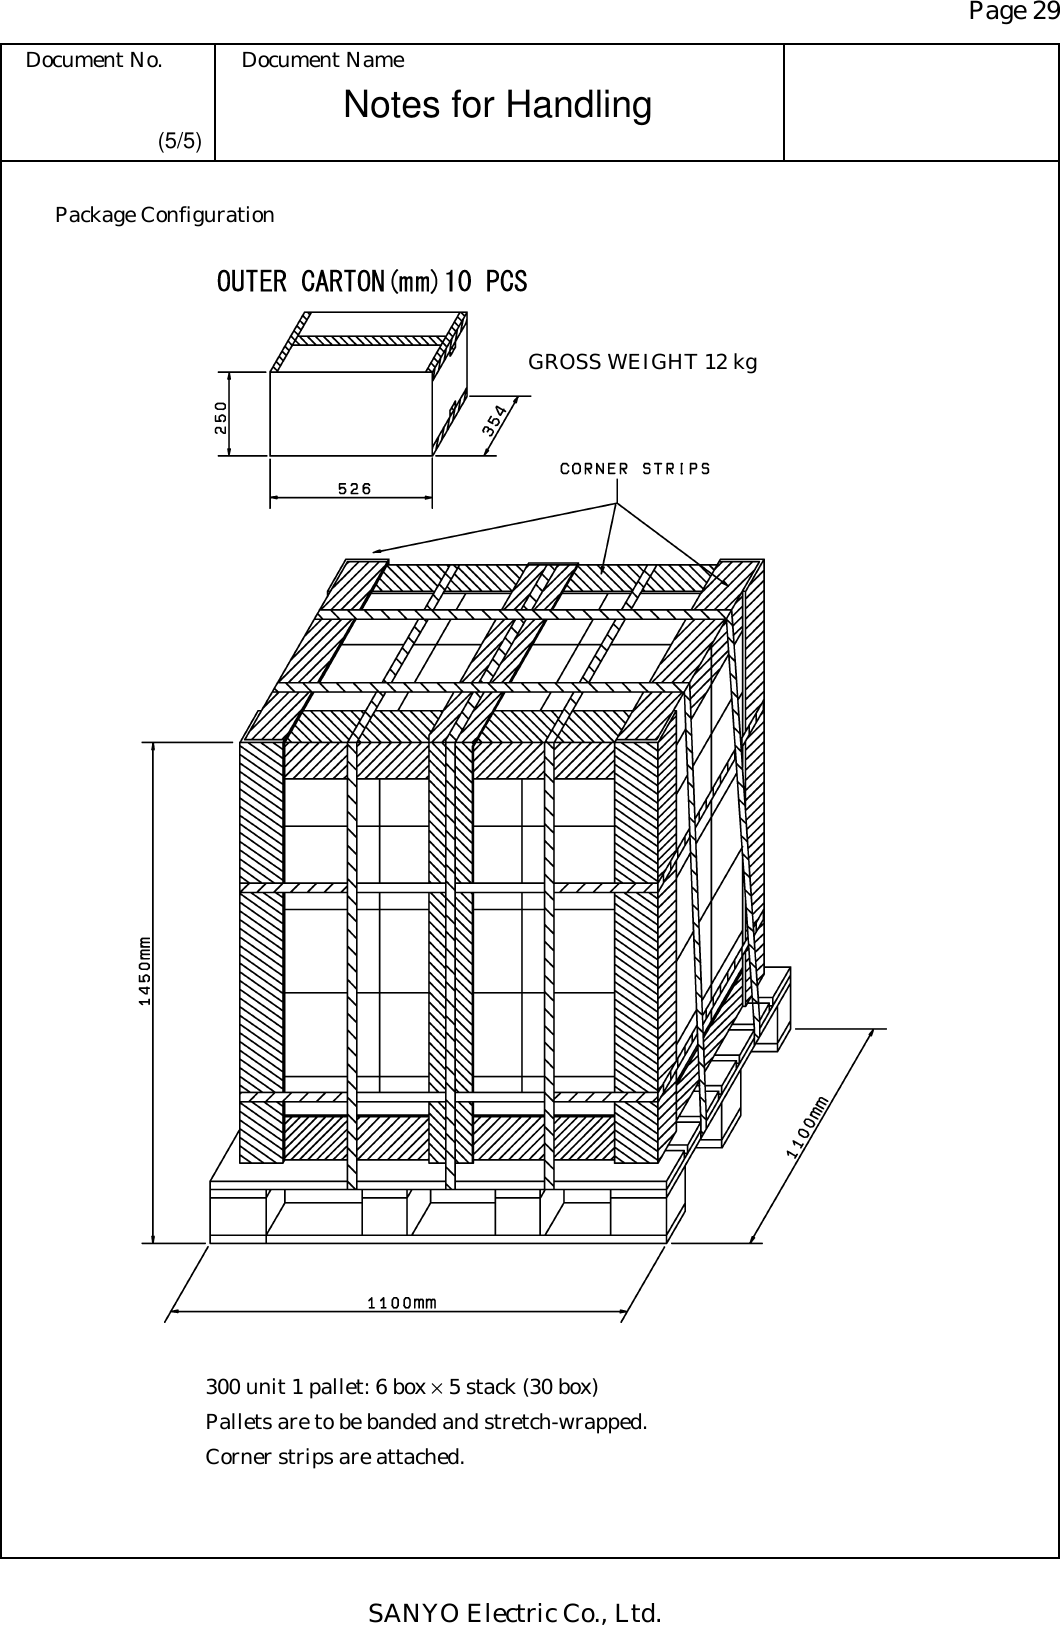 Page 29 Document No.  Document Name SANYO Electric Co., Ltd. Notes for Handling  (5/5) Package Configuration    GROSS WEIGHT 12 kg 300 unit 1 pallet: 6 box × 5 stack (30 box) Pallets are to be banded and stretch-wrapped. Corner strips are attached. 